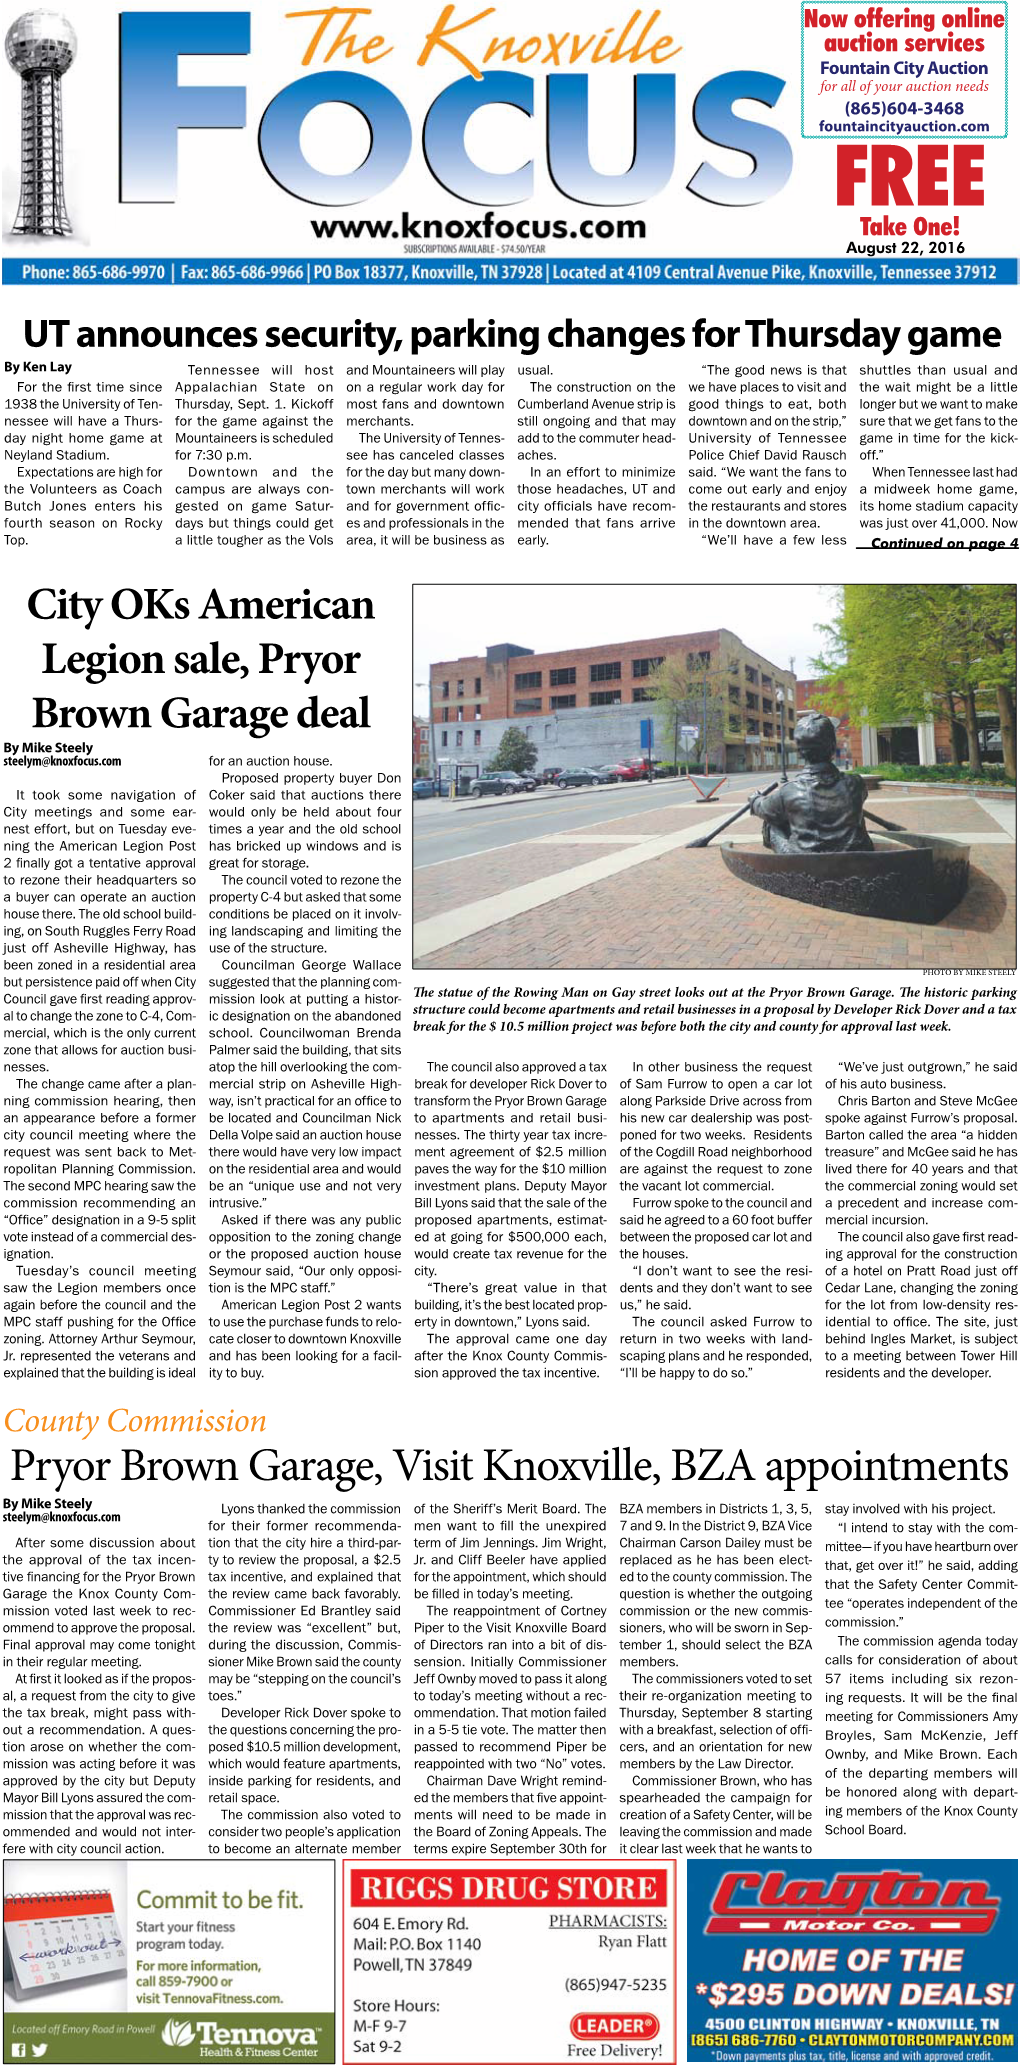 Pryor Brown Garage, Visit Knoxville, BZA Appointments by Mike Steely Steelym@Knoxfocus.Com Lyons Thanked the Commission of the Sheriff’S Merit Board